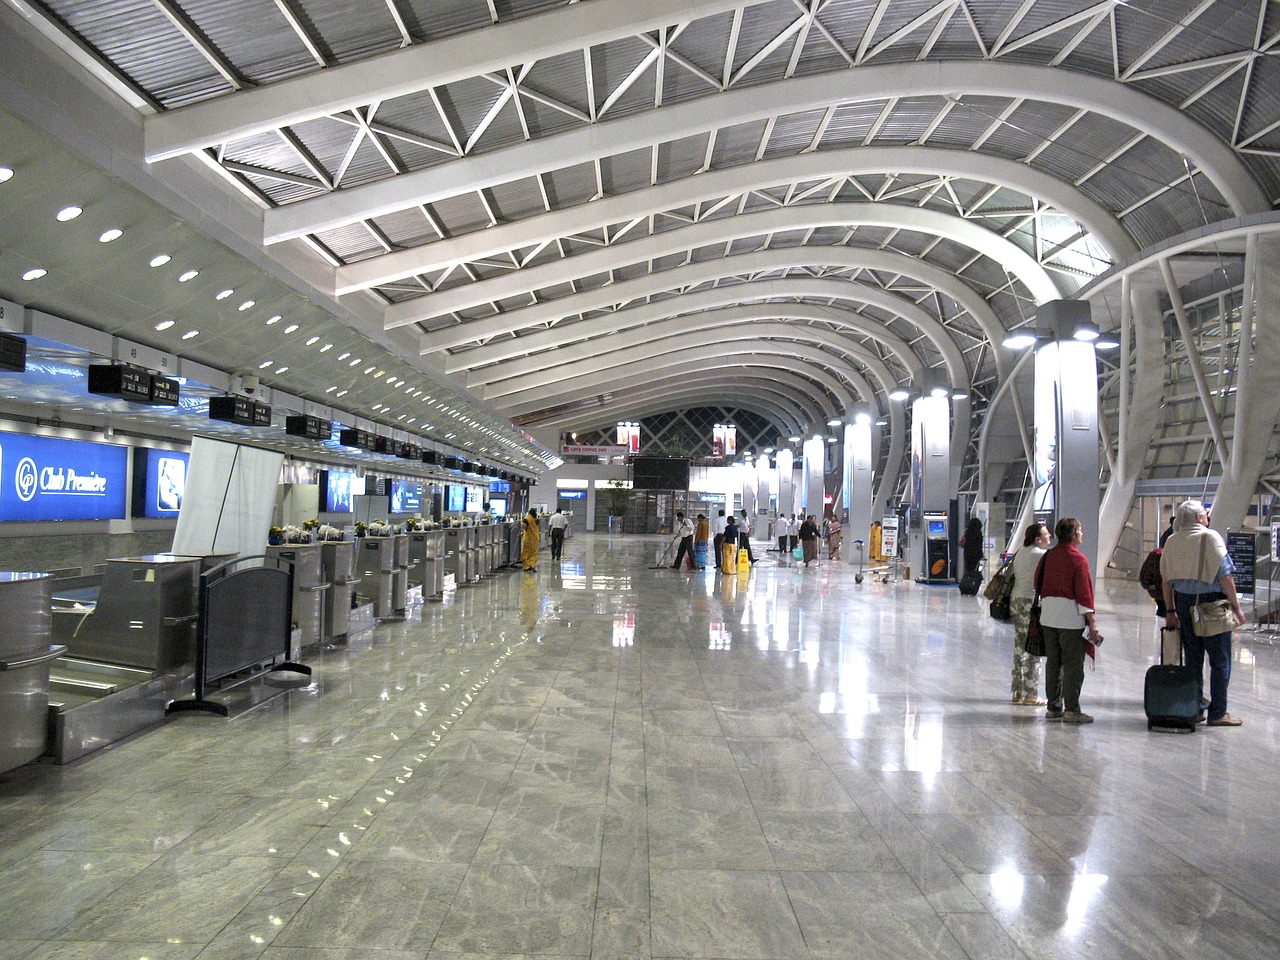 Interior of an airport lobby that's open and airy with people milling around